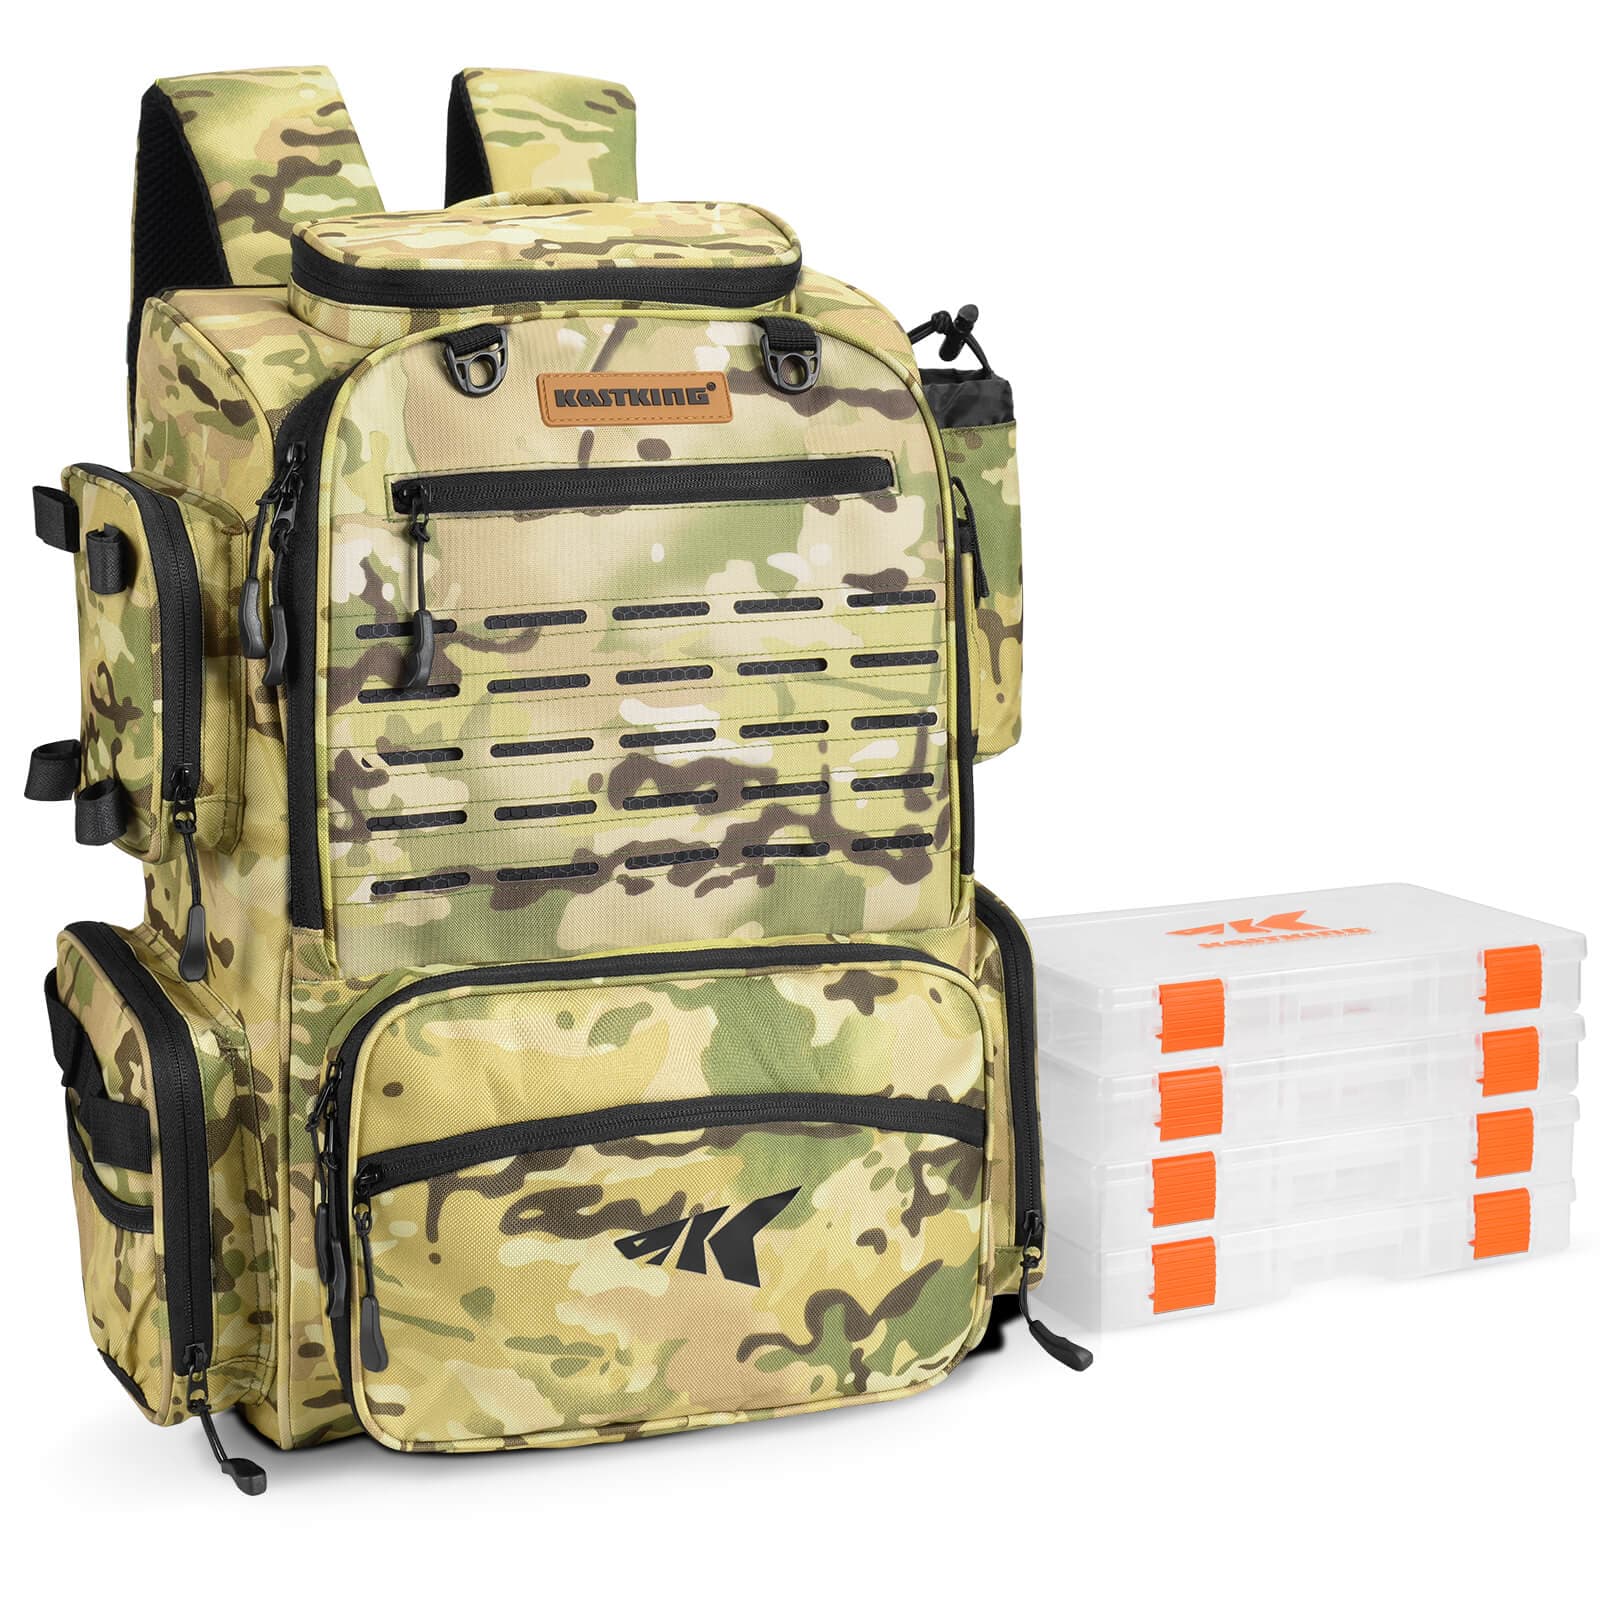 Buy KastKing Bait Boss Lure Bag Utility Binder Tackle Bag - Soft Fishing  Gear Bag, Self-Healing Zippers & Padded Handle Design Online at Lowest  Price Ever in India